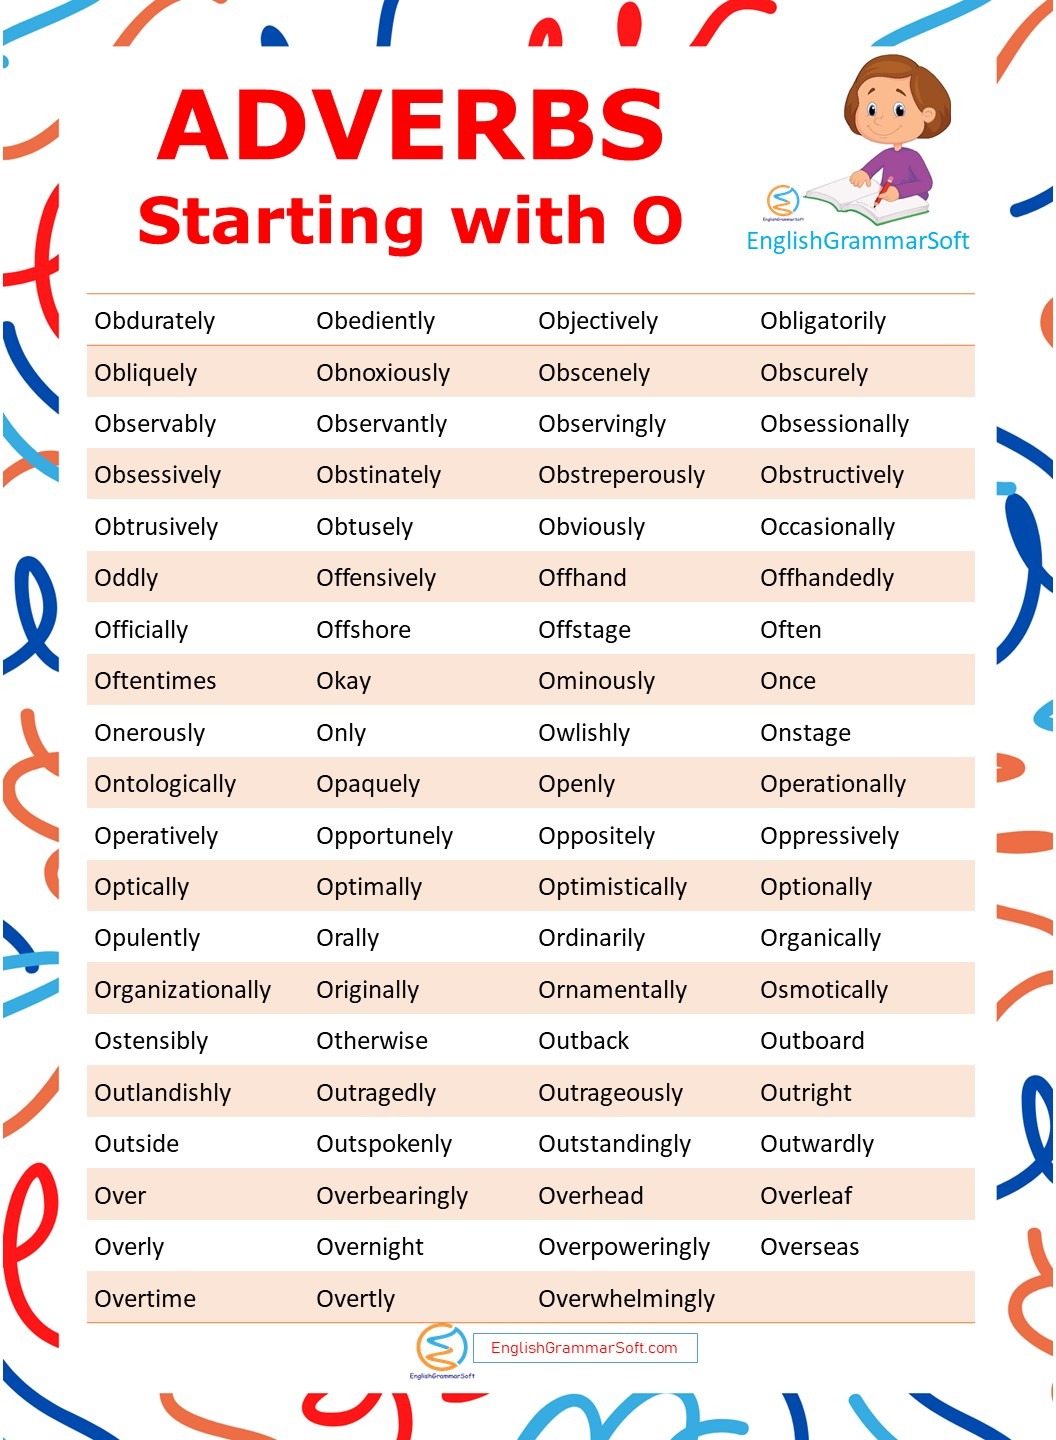 adverbs starting with O